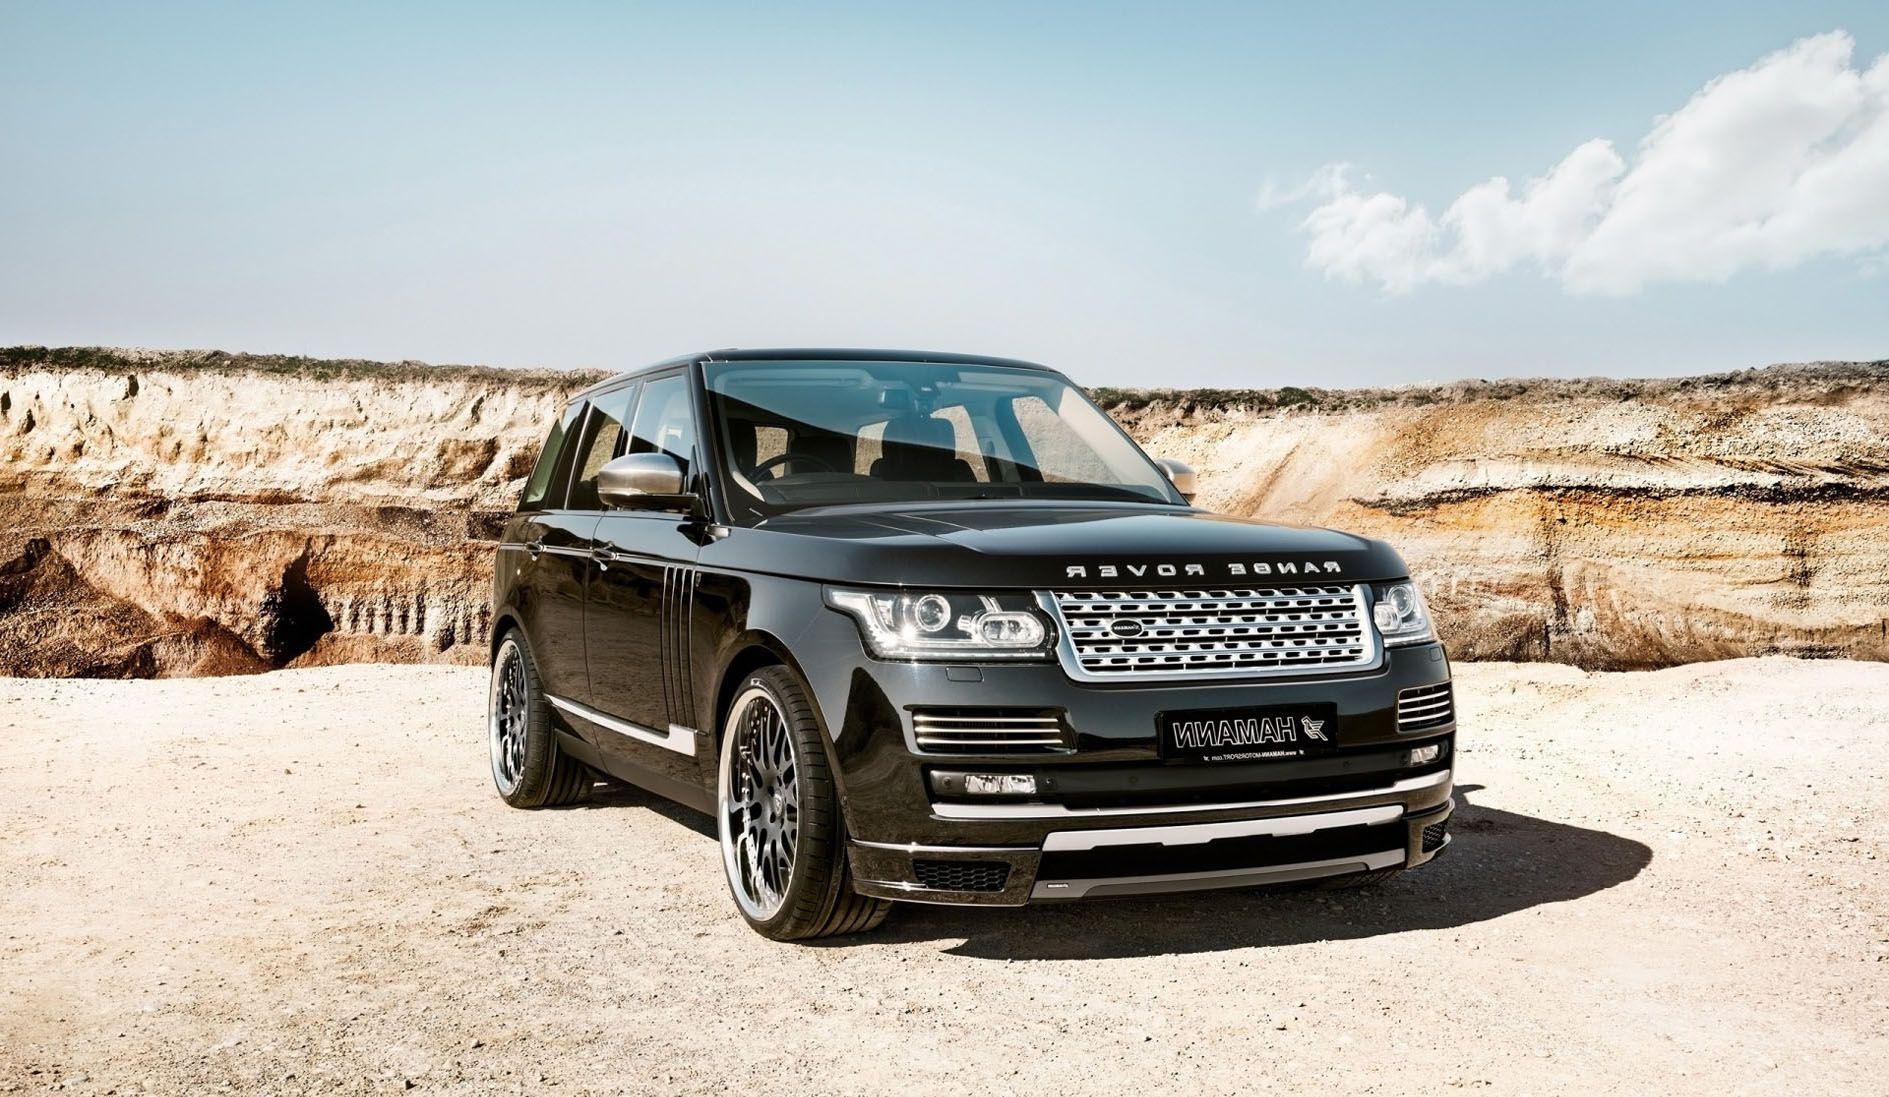 Download Wallpaper Car Range Rover Vogue 2014. All About Gallery Car